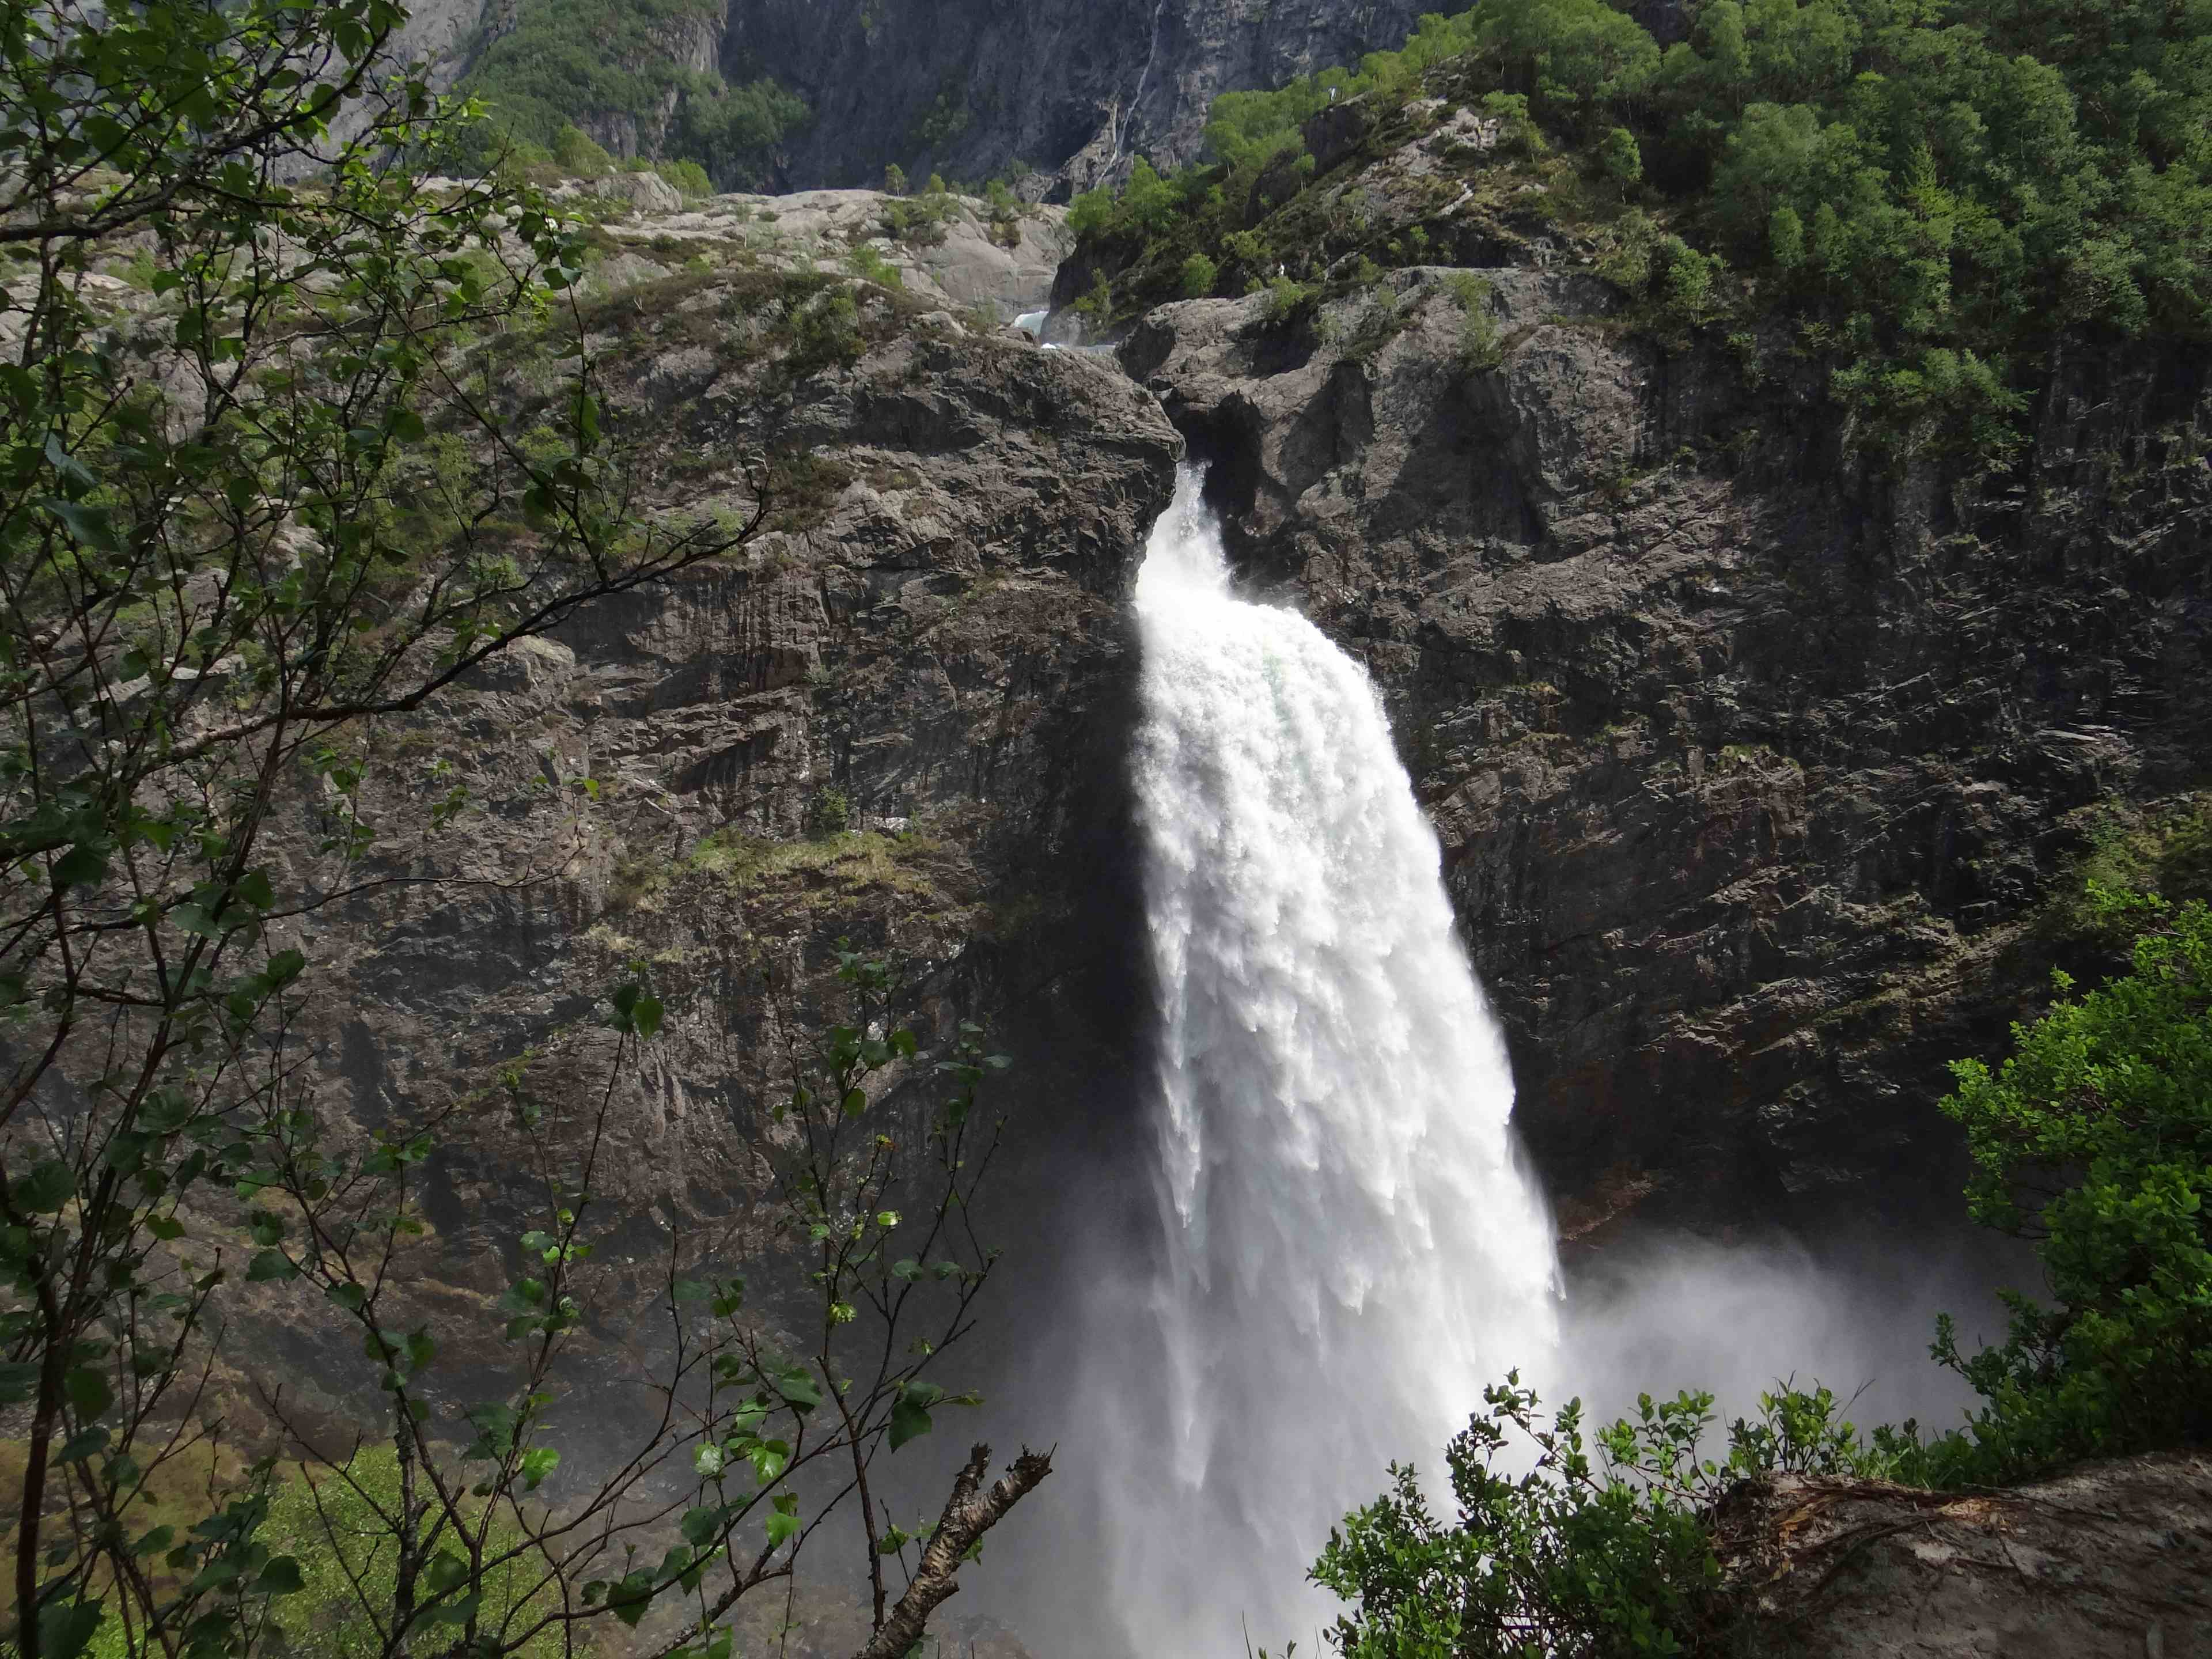 Månafossen Waterfall, viewed from viewpoint from the forest